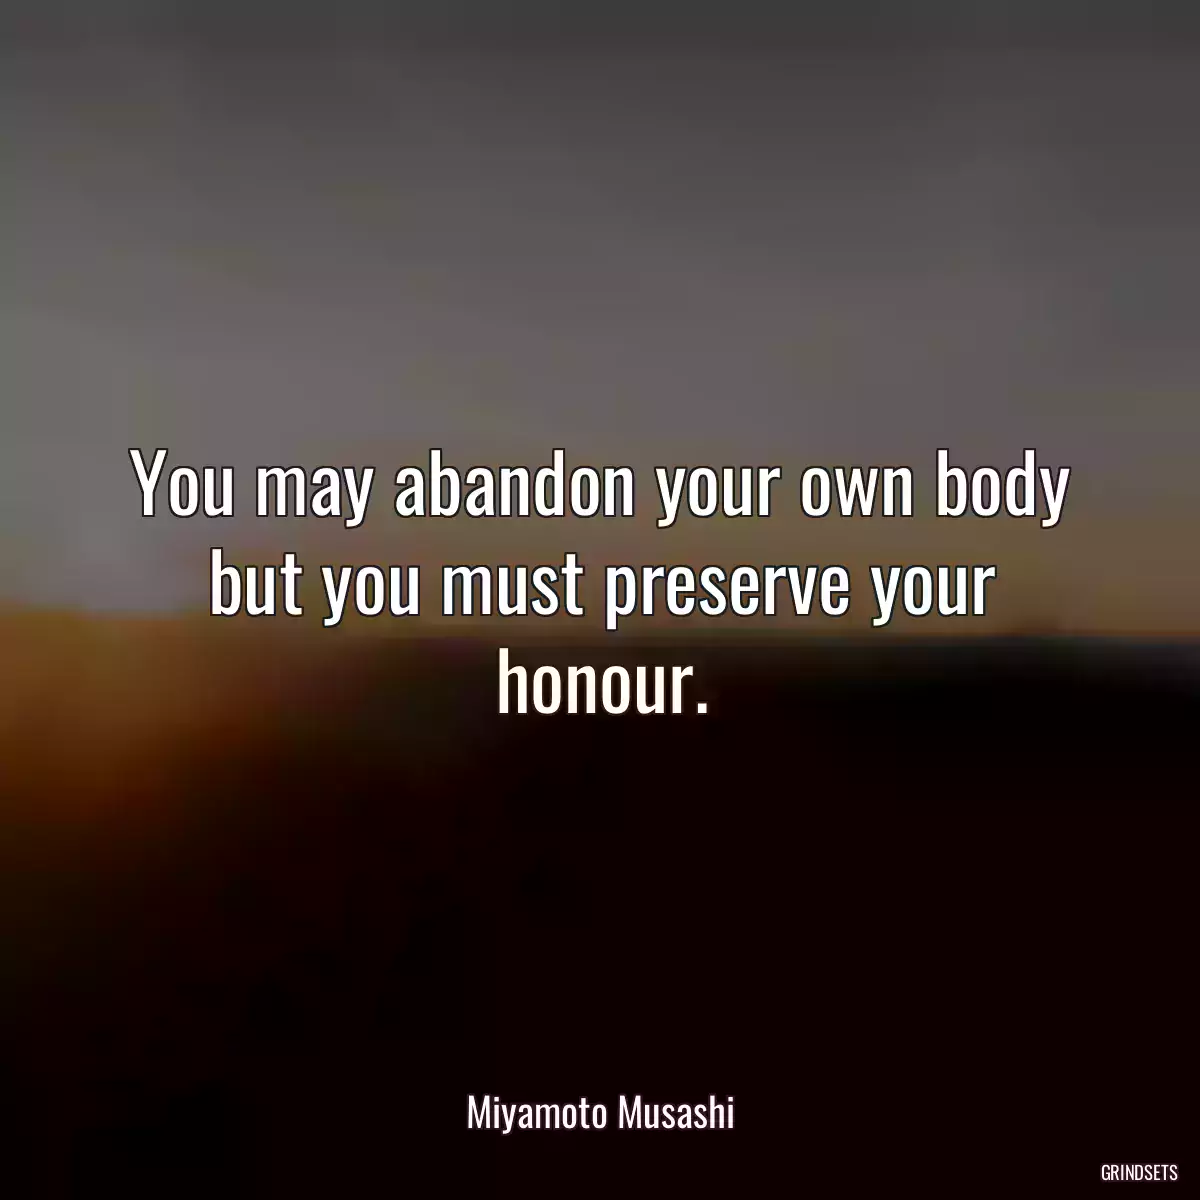 You may abandon your own body but you must preserve your honour.